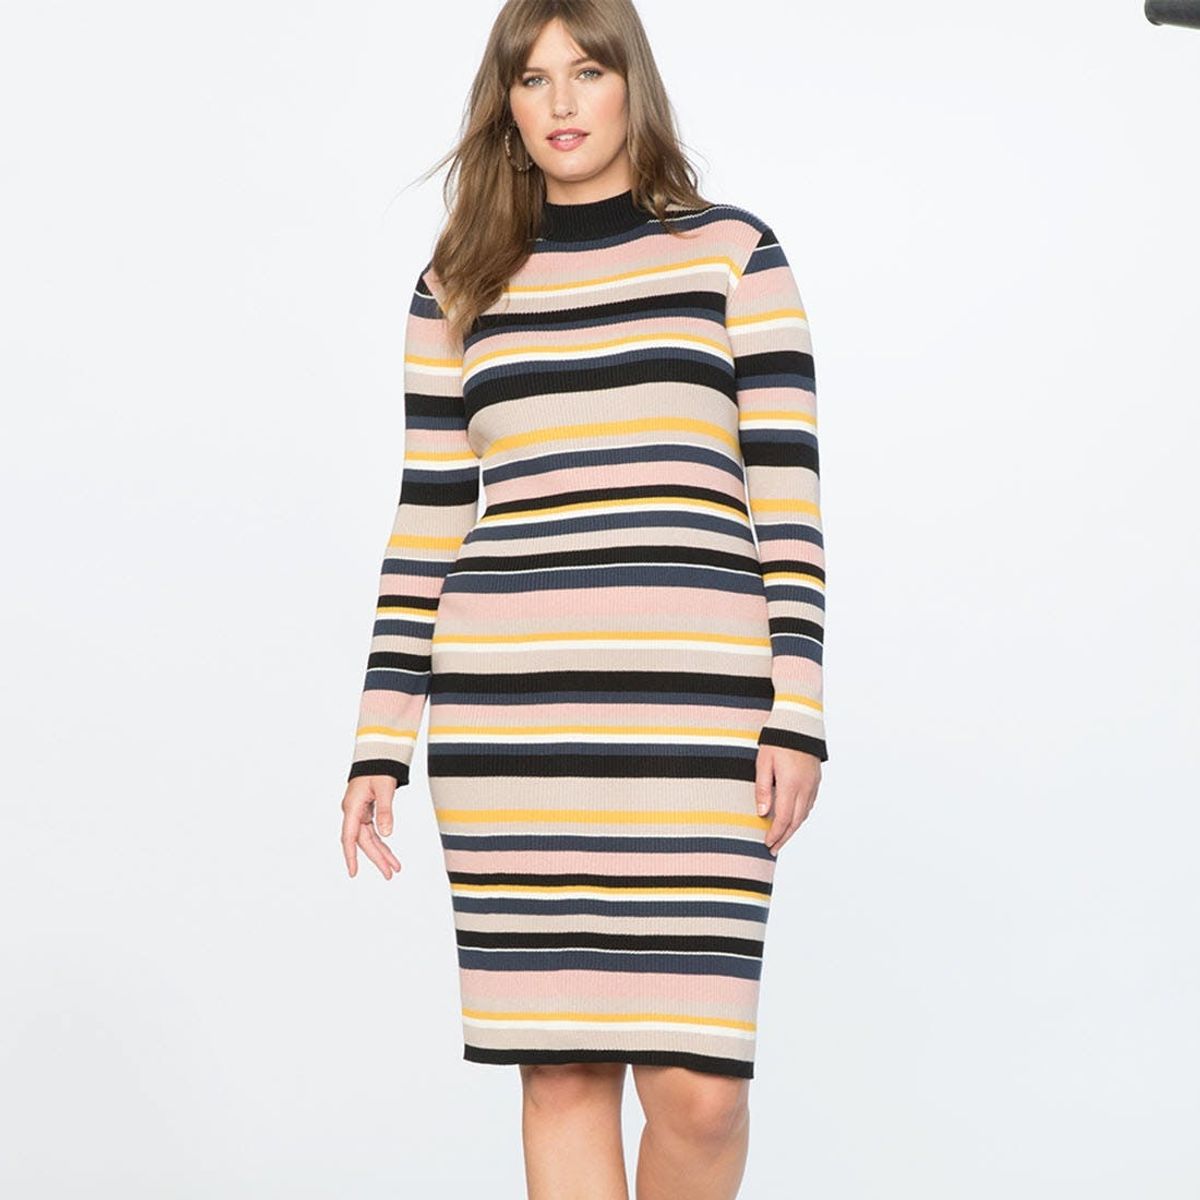 12 Sweater Dresses for Every Fall Budget